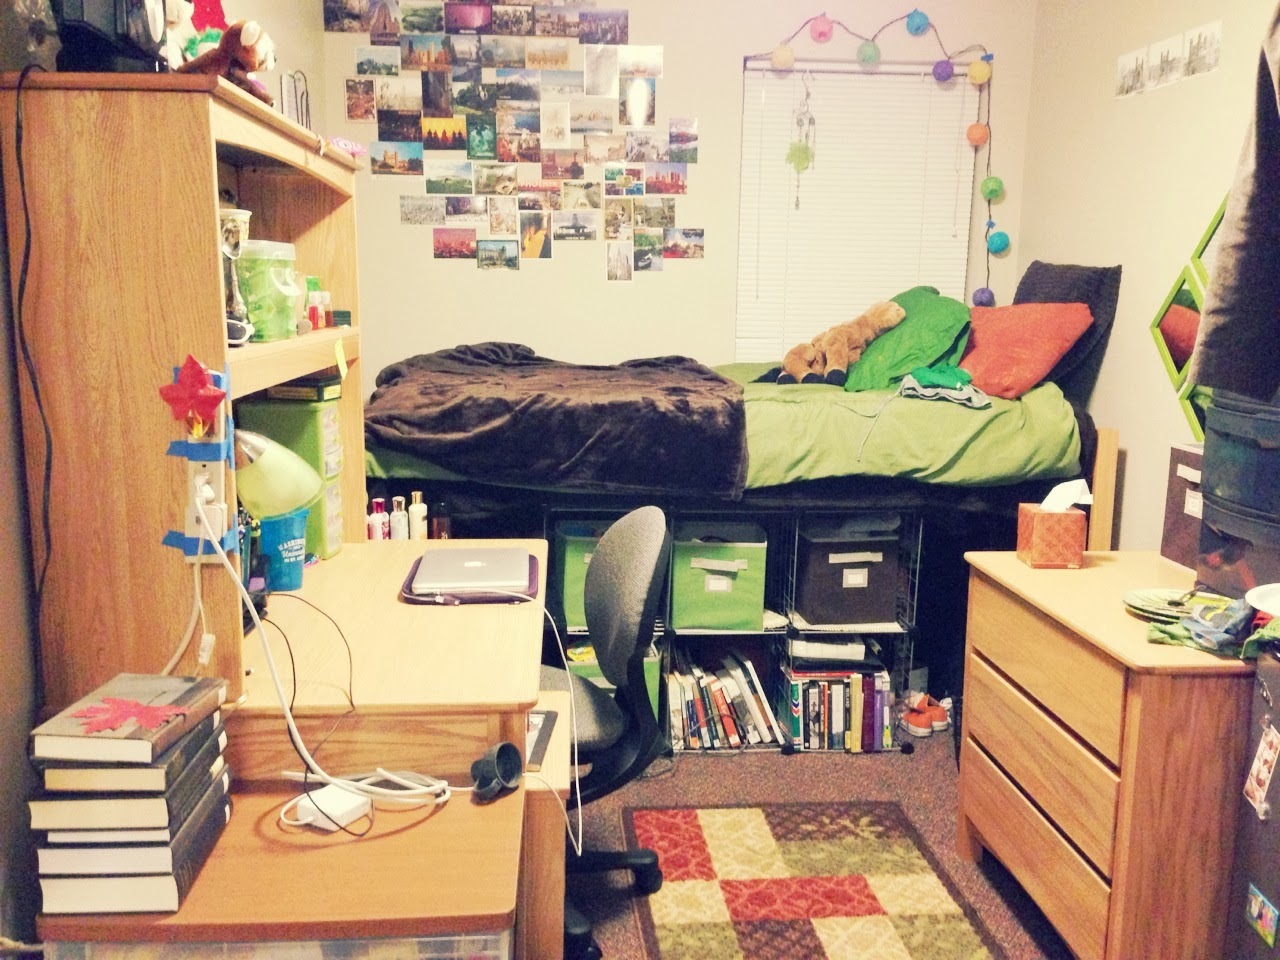 Keegan sent me this picture of her dorm.